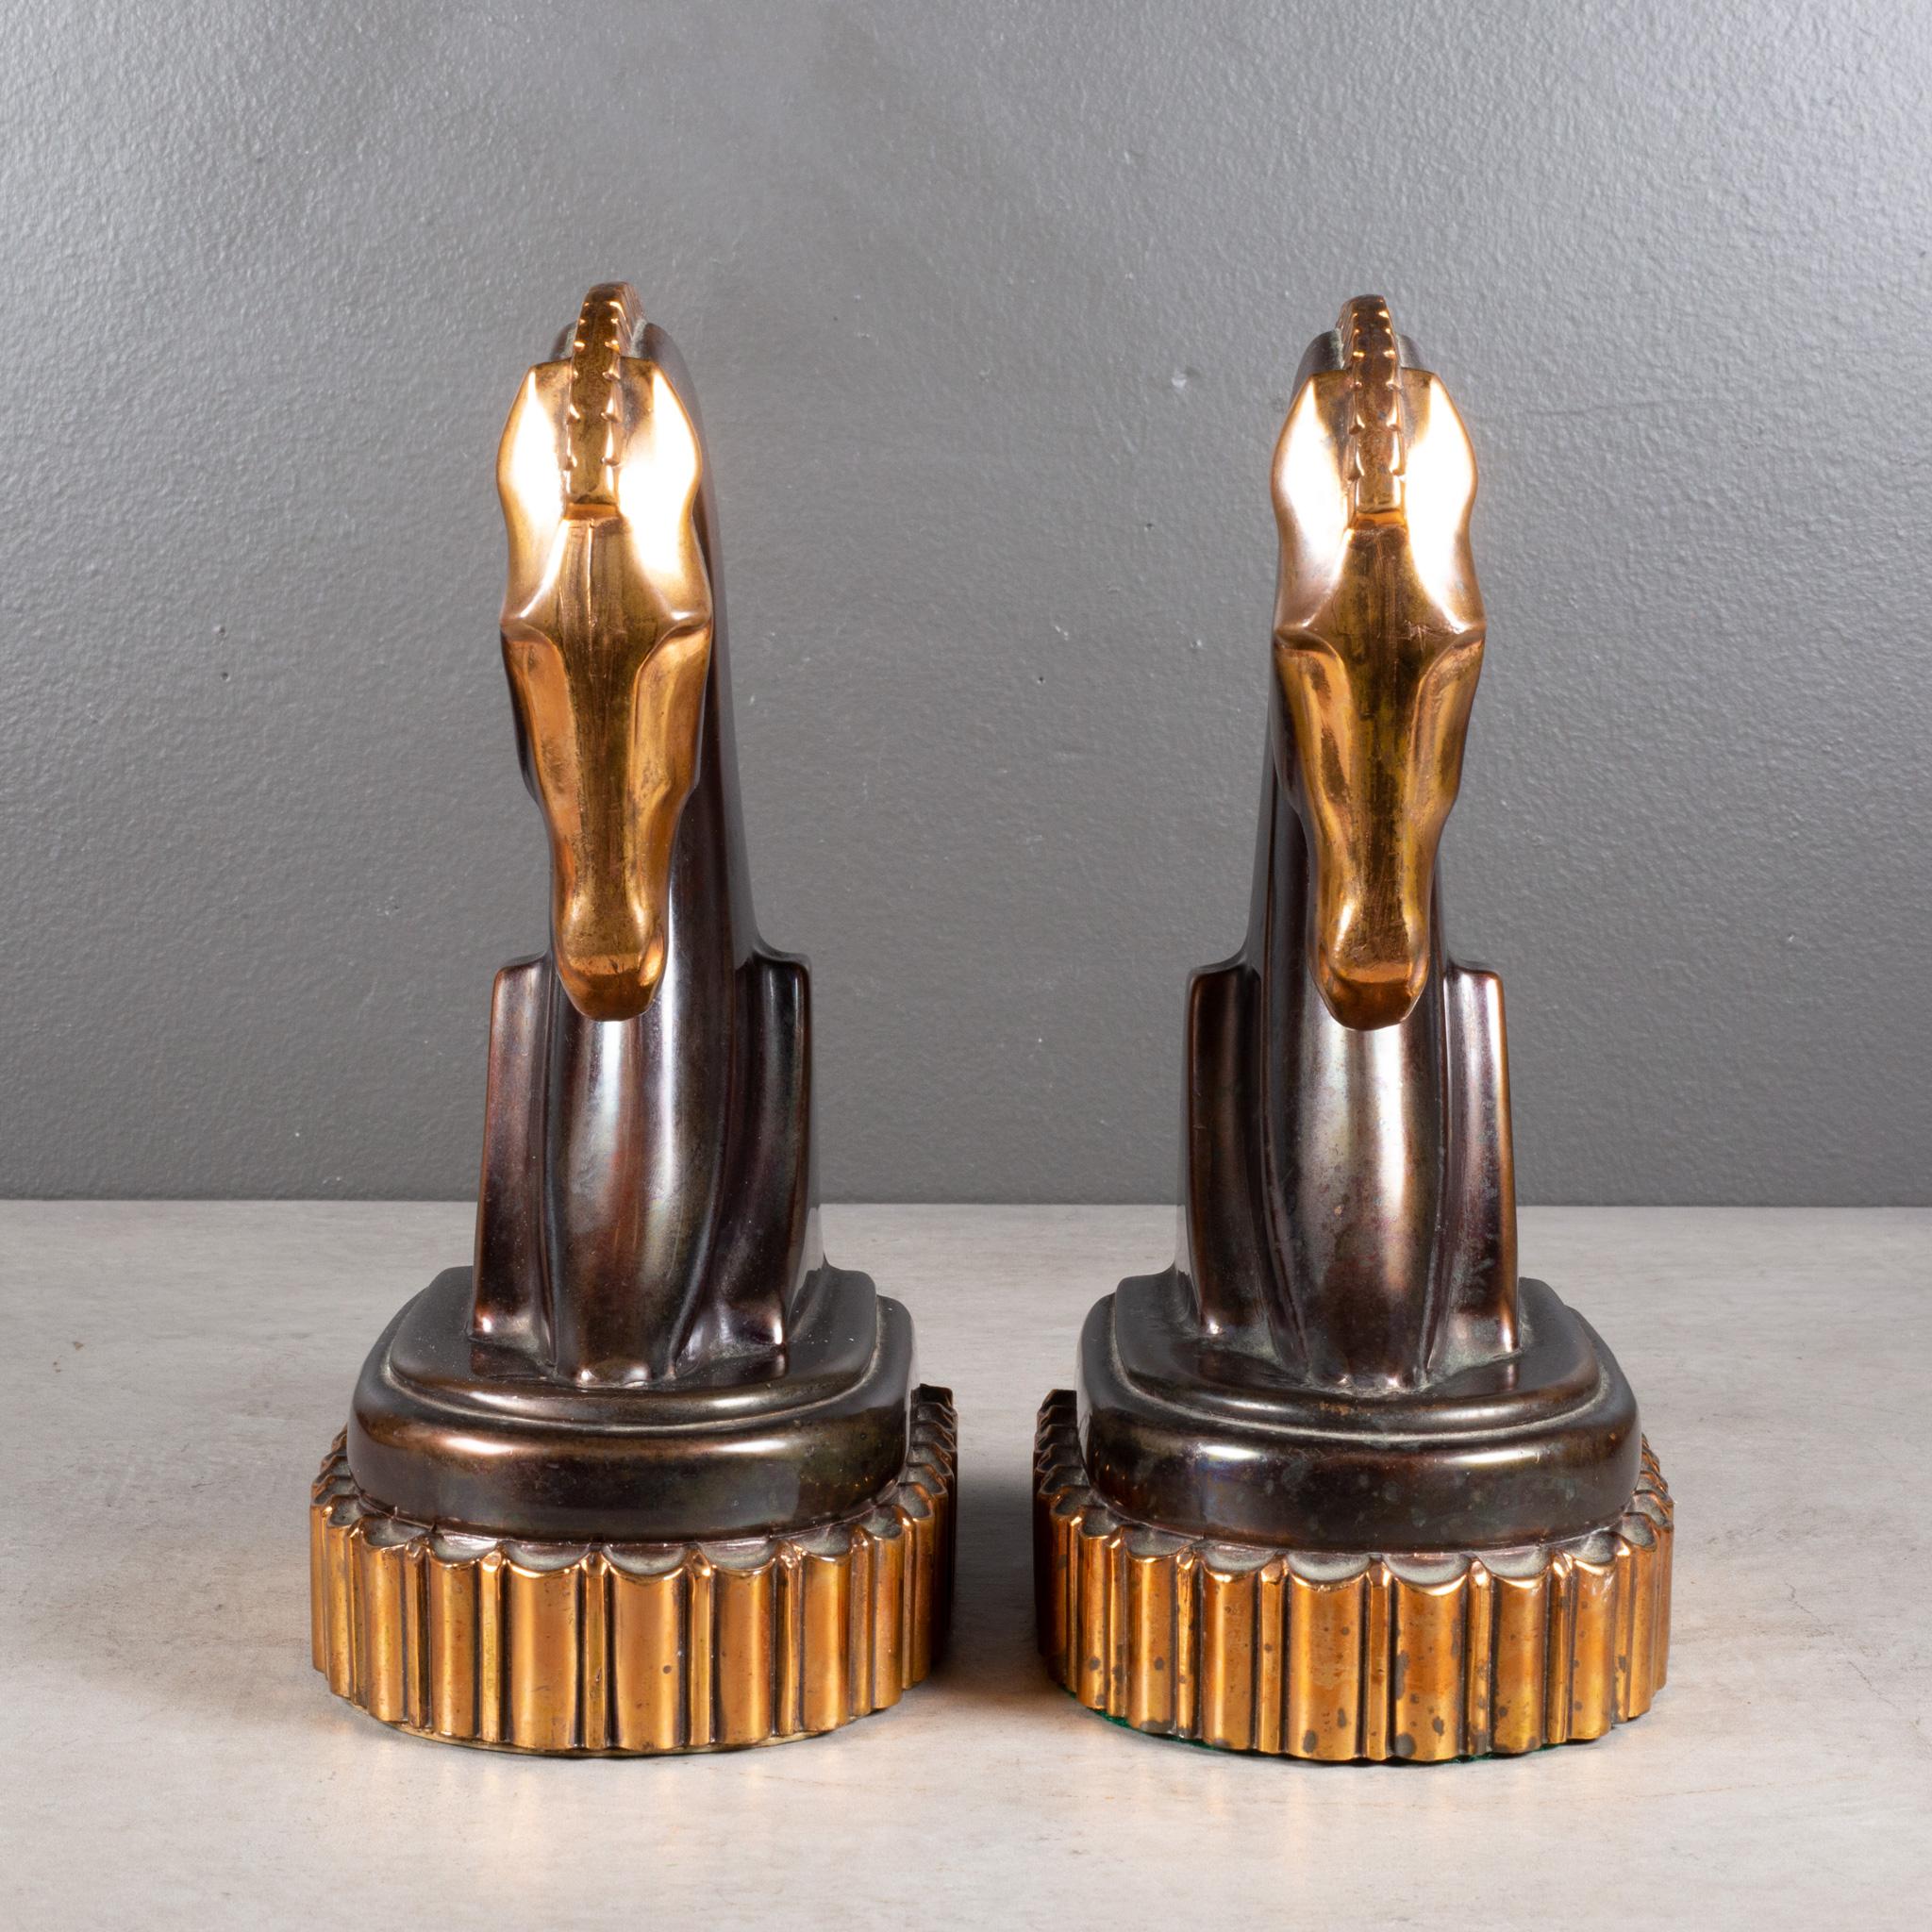 Oversized Art Deco Bronze & Copper Trojan Horse Bookends c.1930 (FREE SHIPPING) In Good Condition For Sale In San Francisco, CA